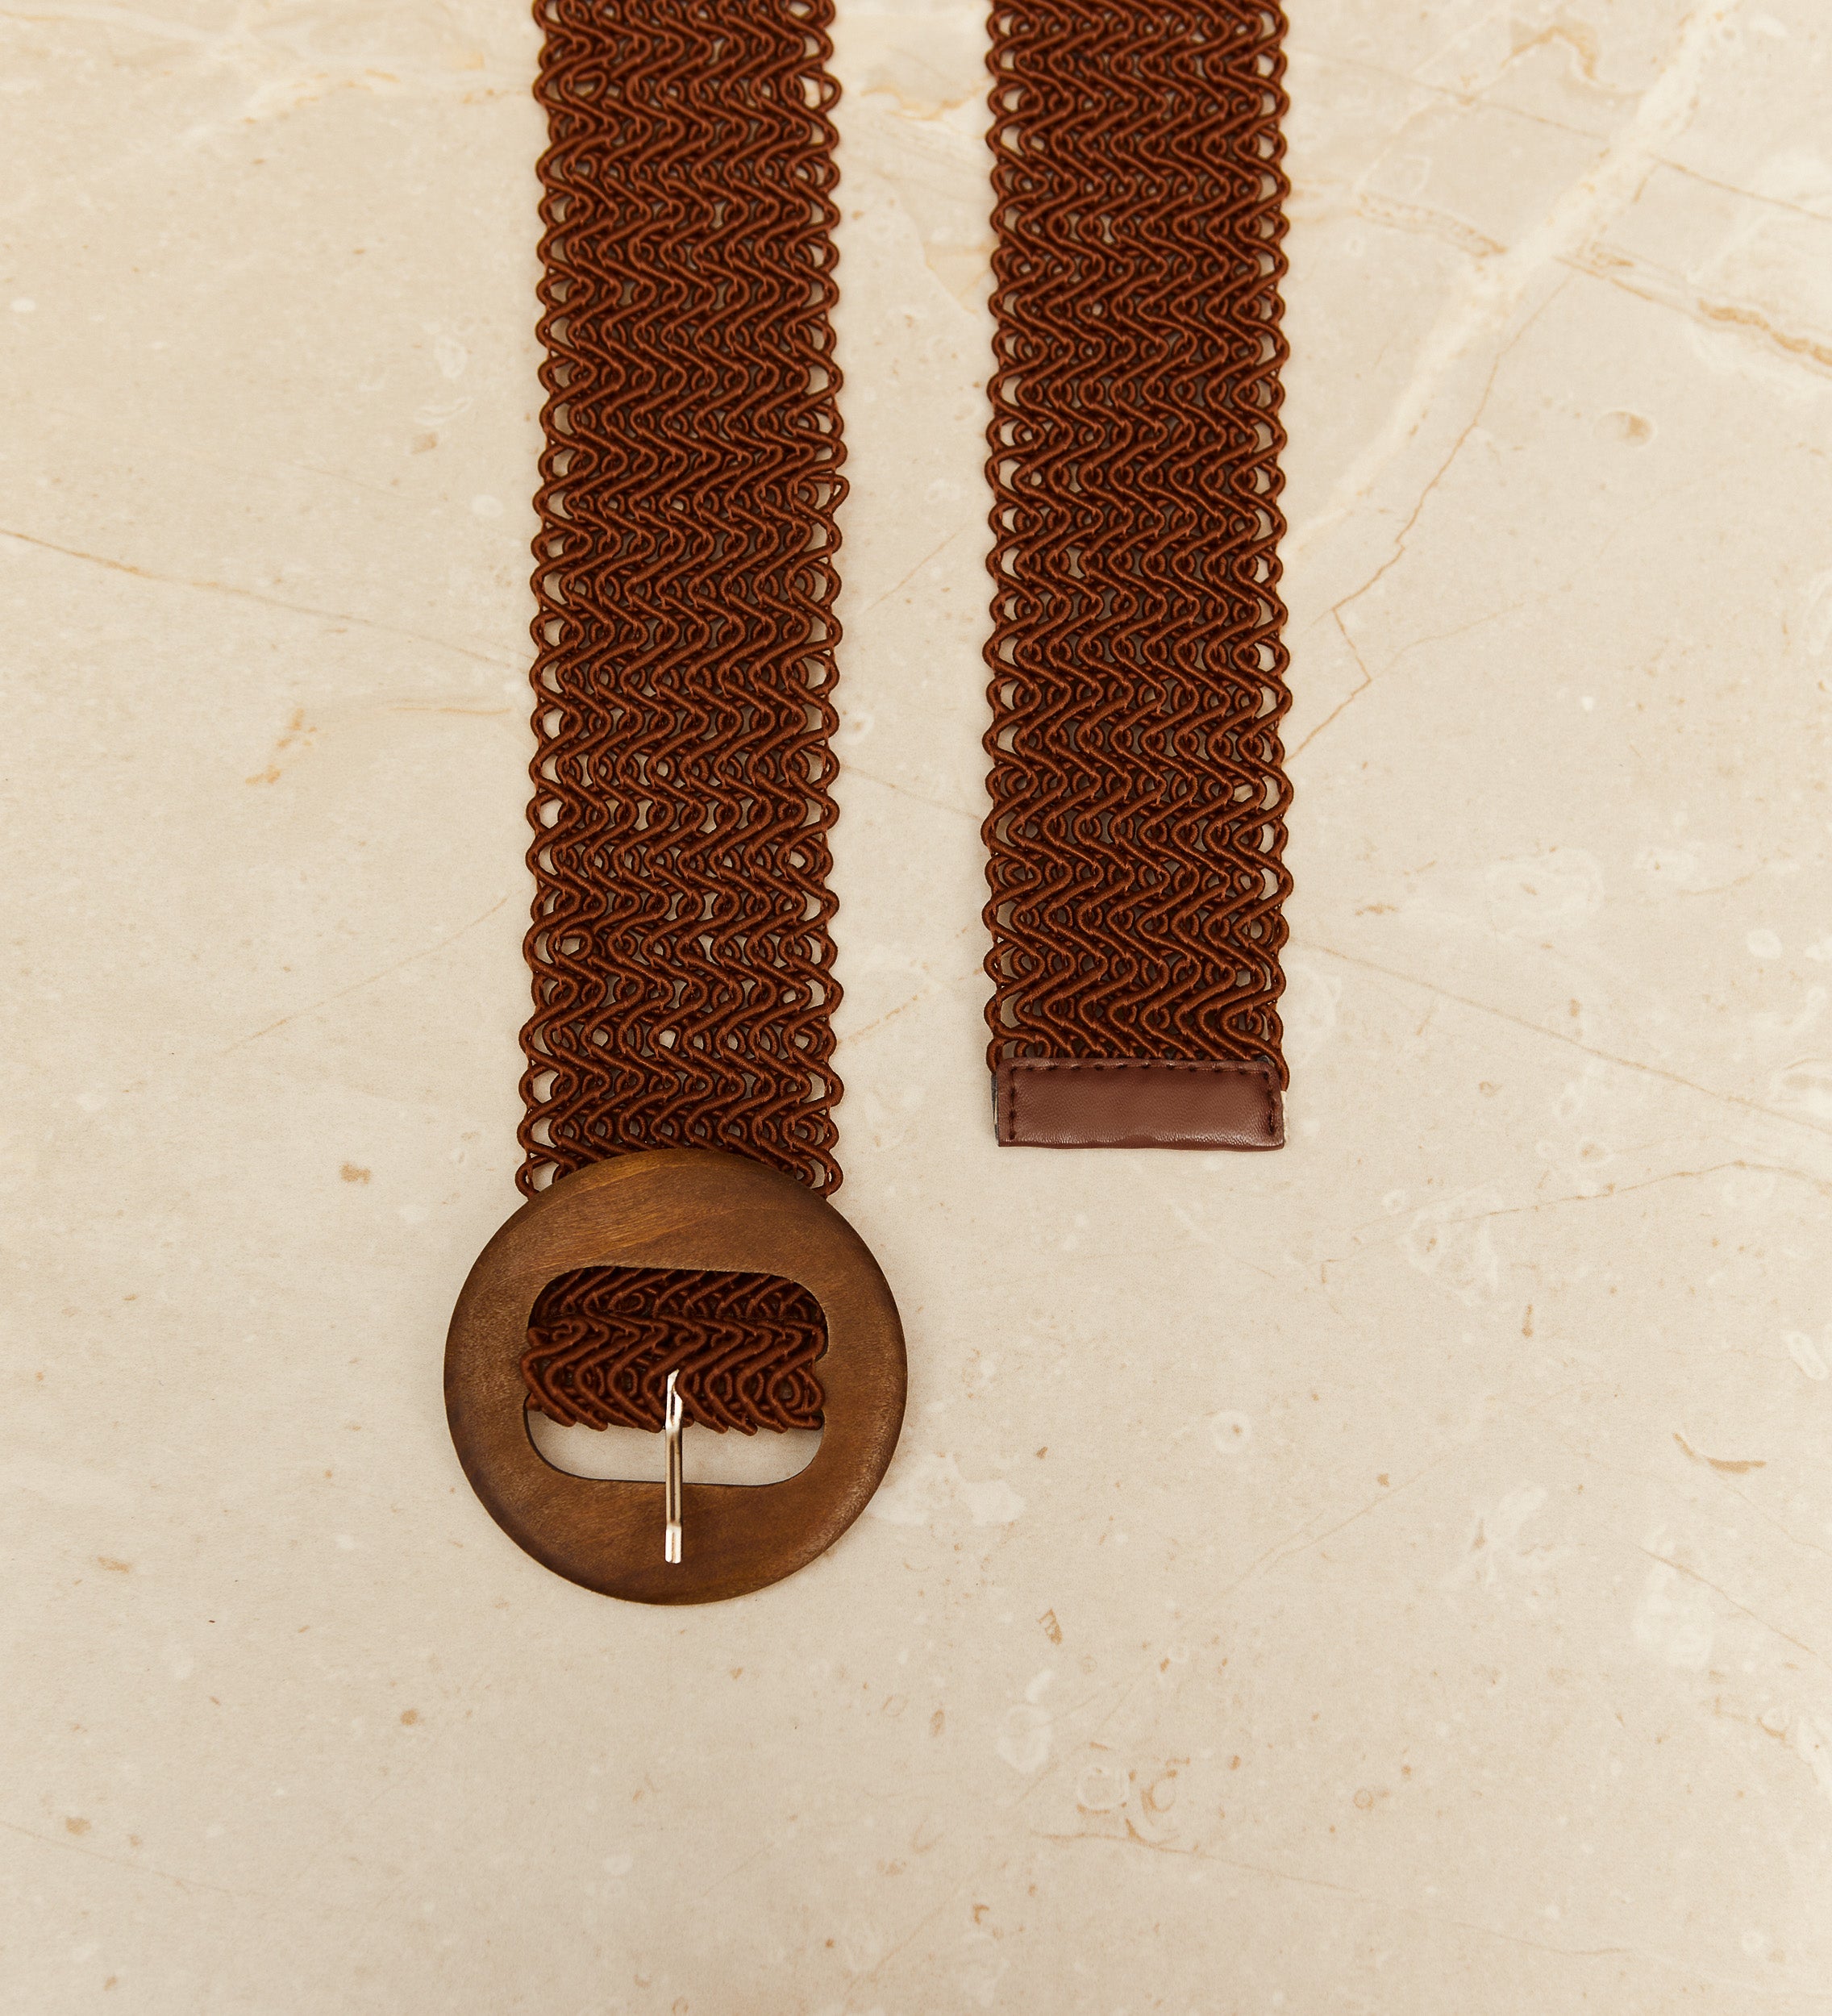 Intertwined rope belt with wooden buckle